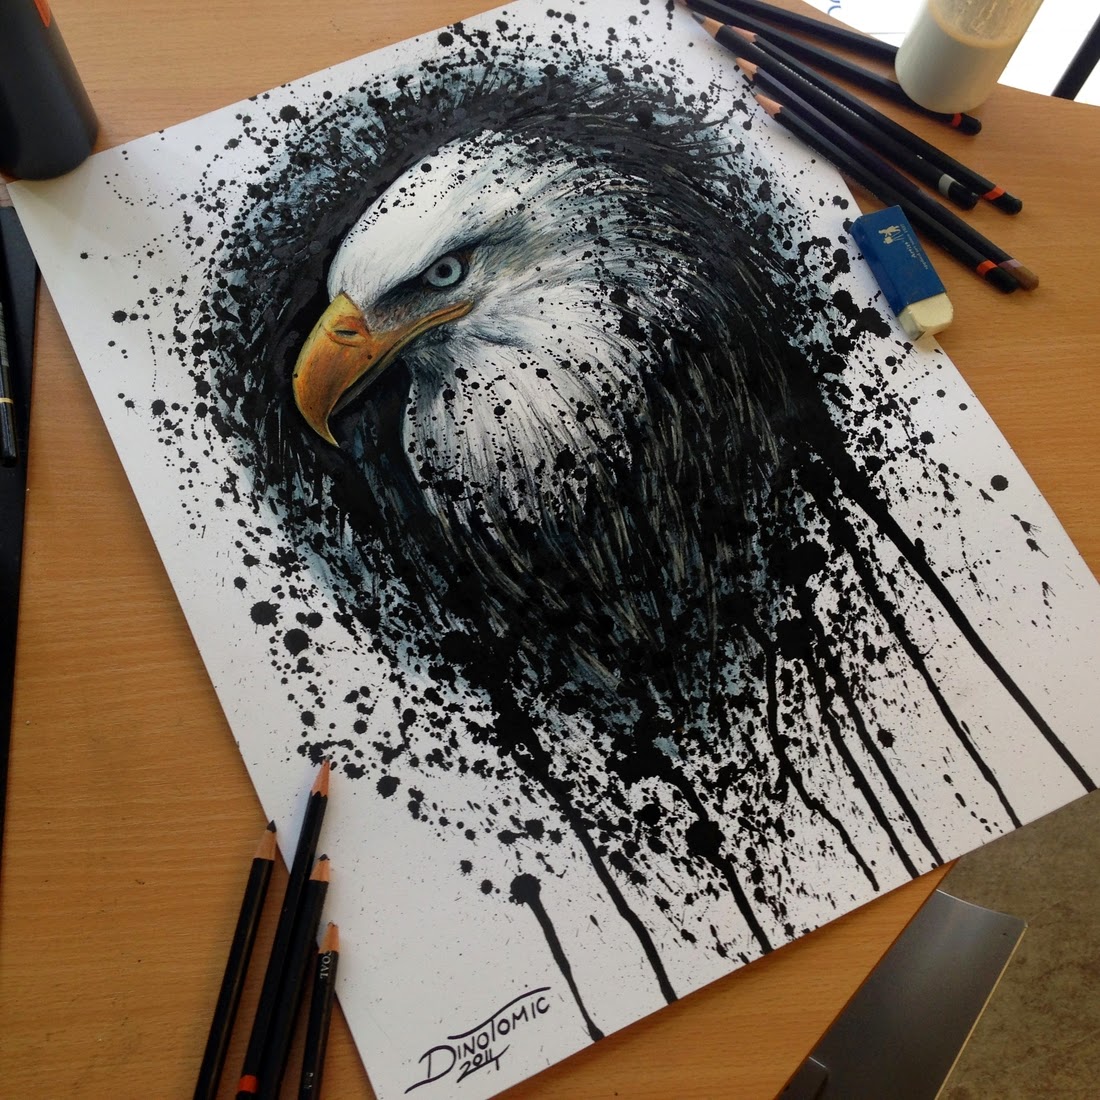 12-Eagle-Splatter-Dino-Tomic-AtomiccircuS-Mastering-Art-in-Eclectic-Drawings-www-designstack-co